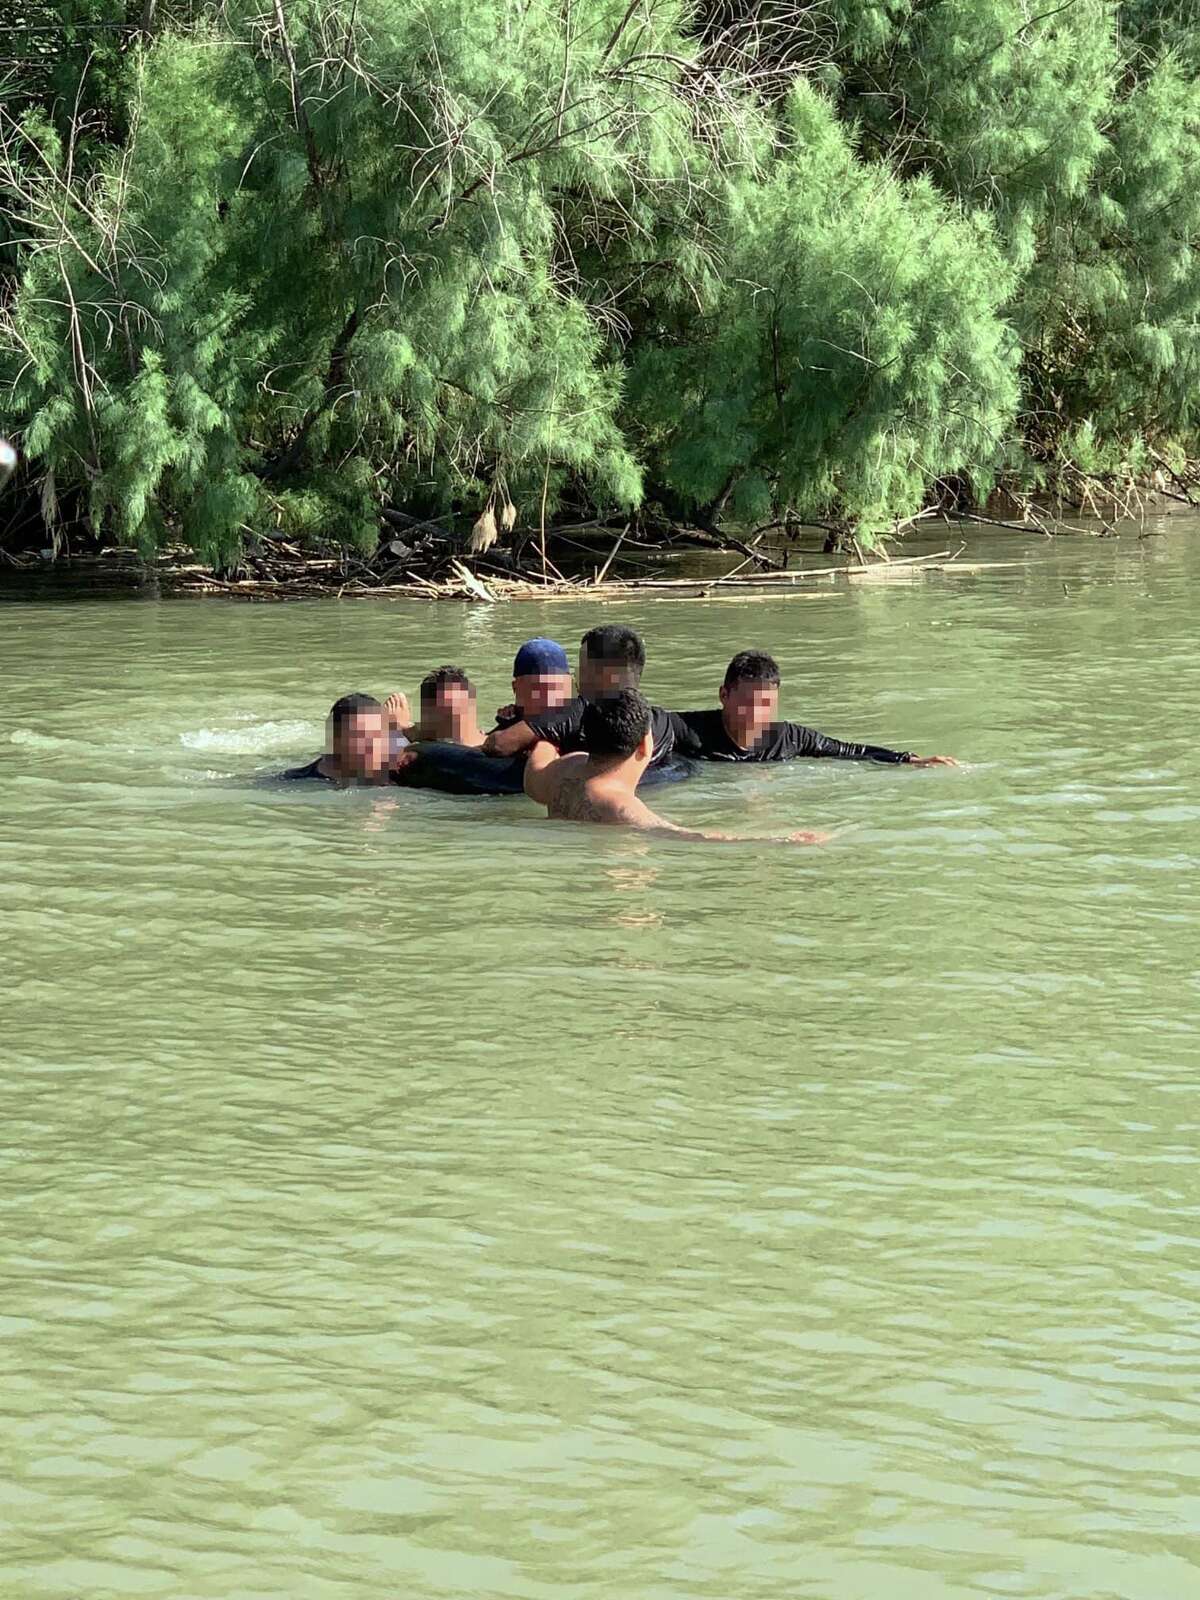 U.S. Border Patrol agents assigned to the Marine Unit apprehended 12 migrants who tried to cross the border using floating devices.